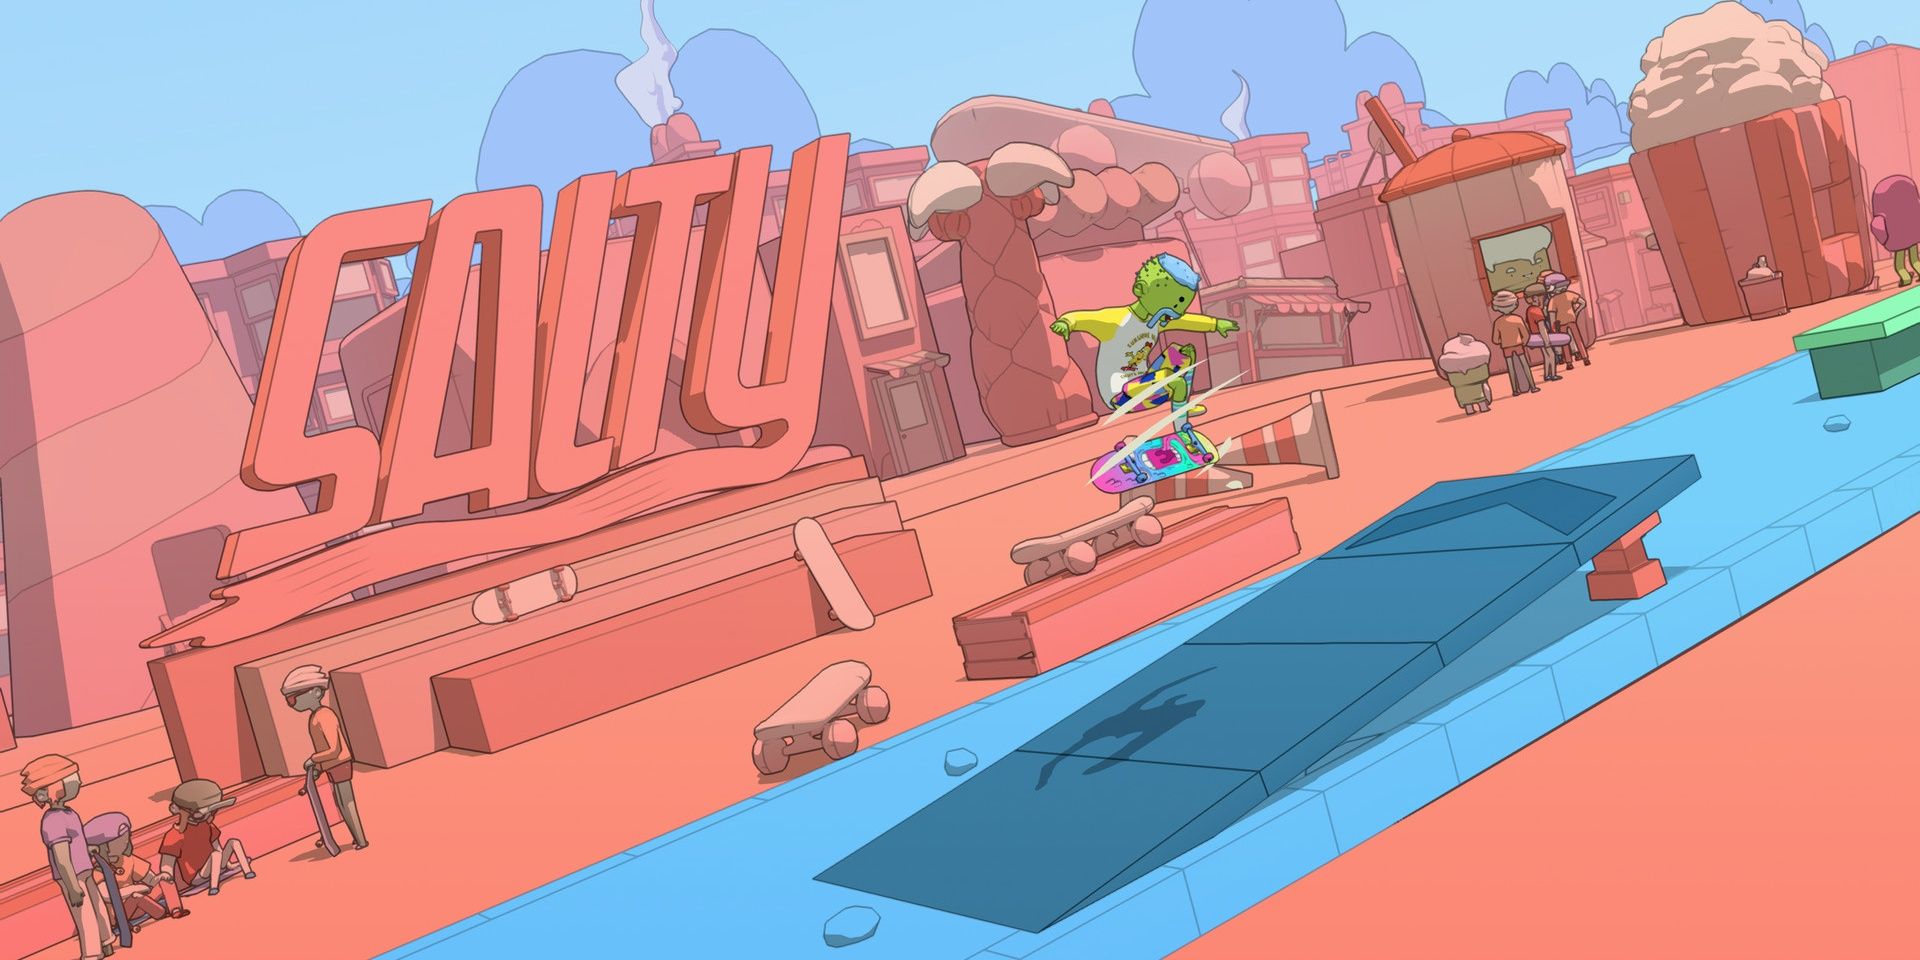 A player doing an ollie over a ramp in OlliOlli World